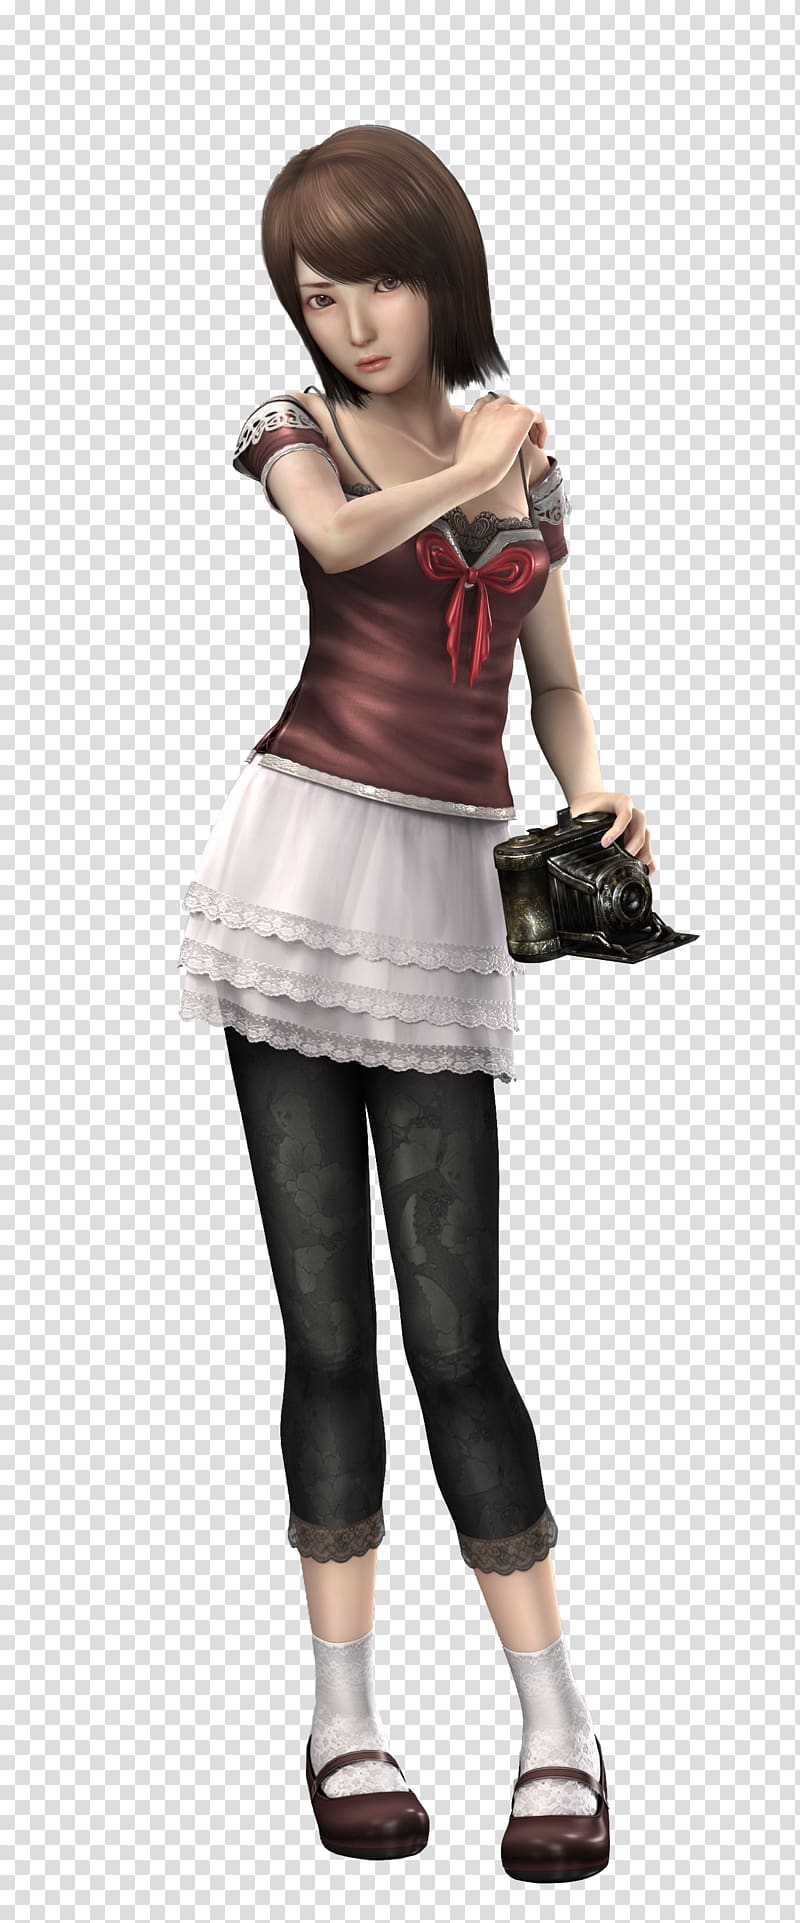 Fatal Frame II: Crimson Butterfly Project Zero 2: Wii Edition Fatal Frame: Maiden of Black Water Fatal Frame: Mask of the Lunar Eclipse, Aya Brea transparent background PNG clipart